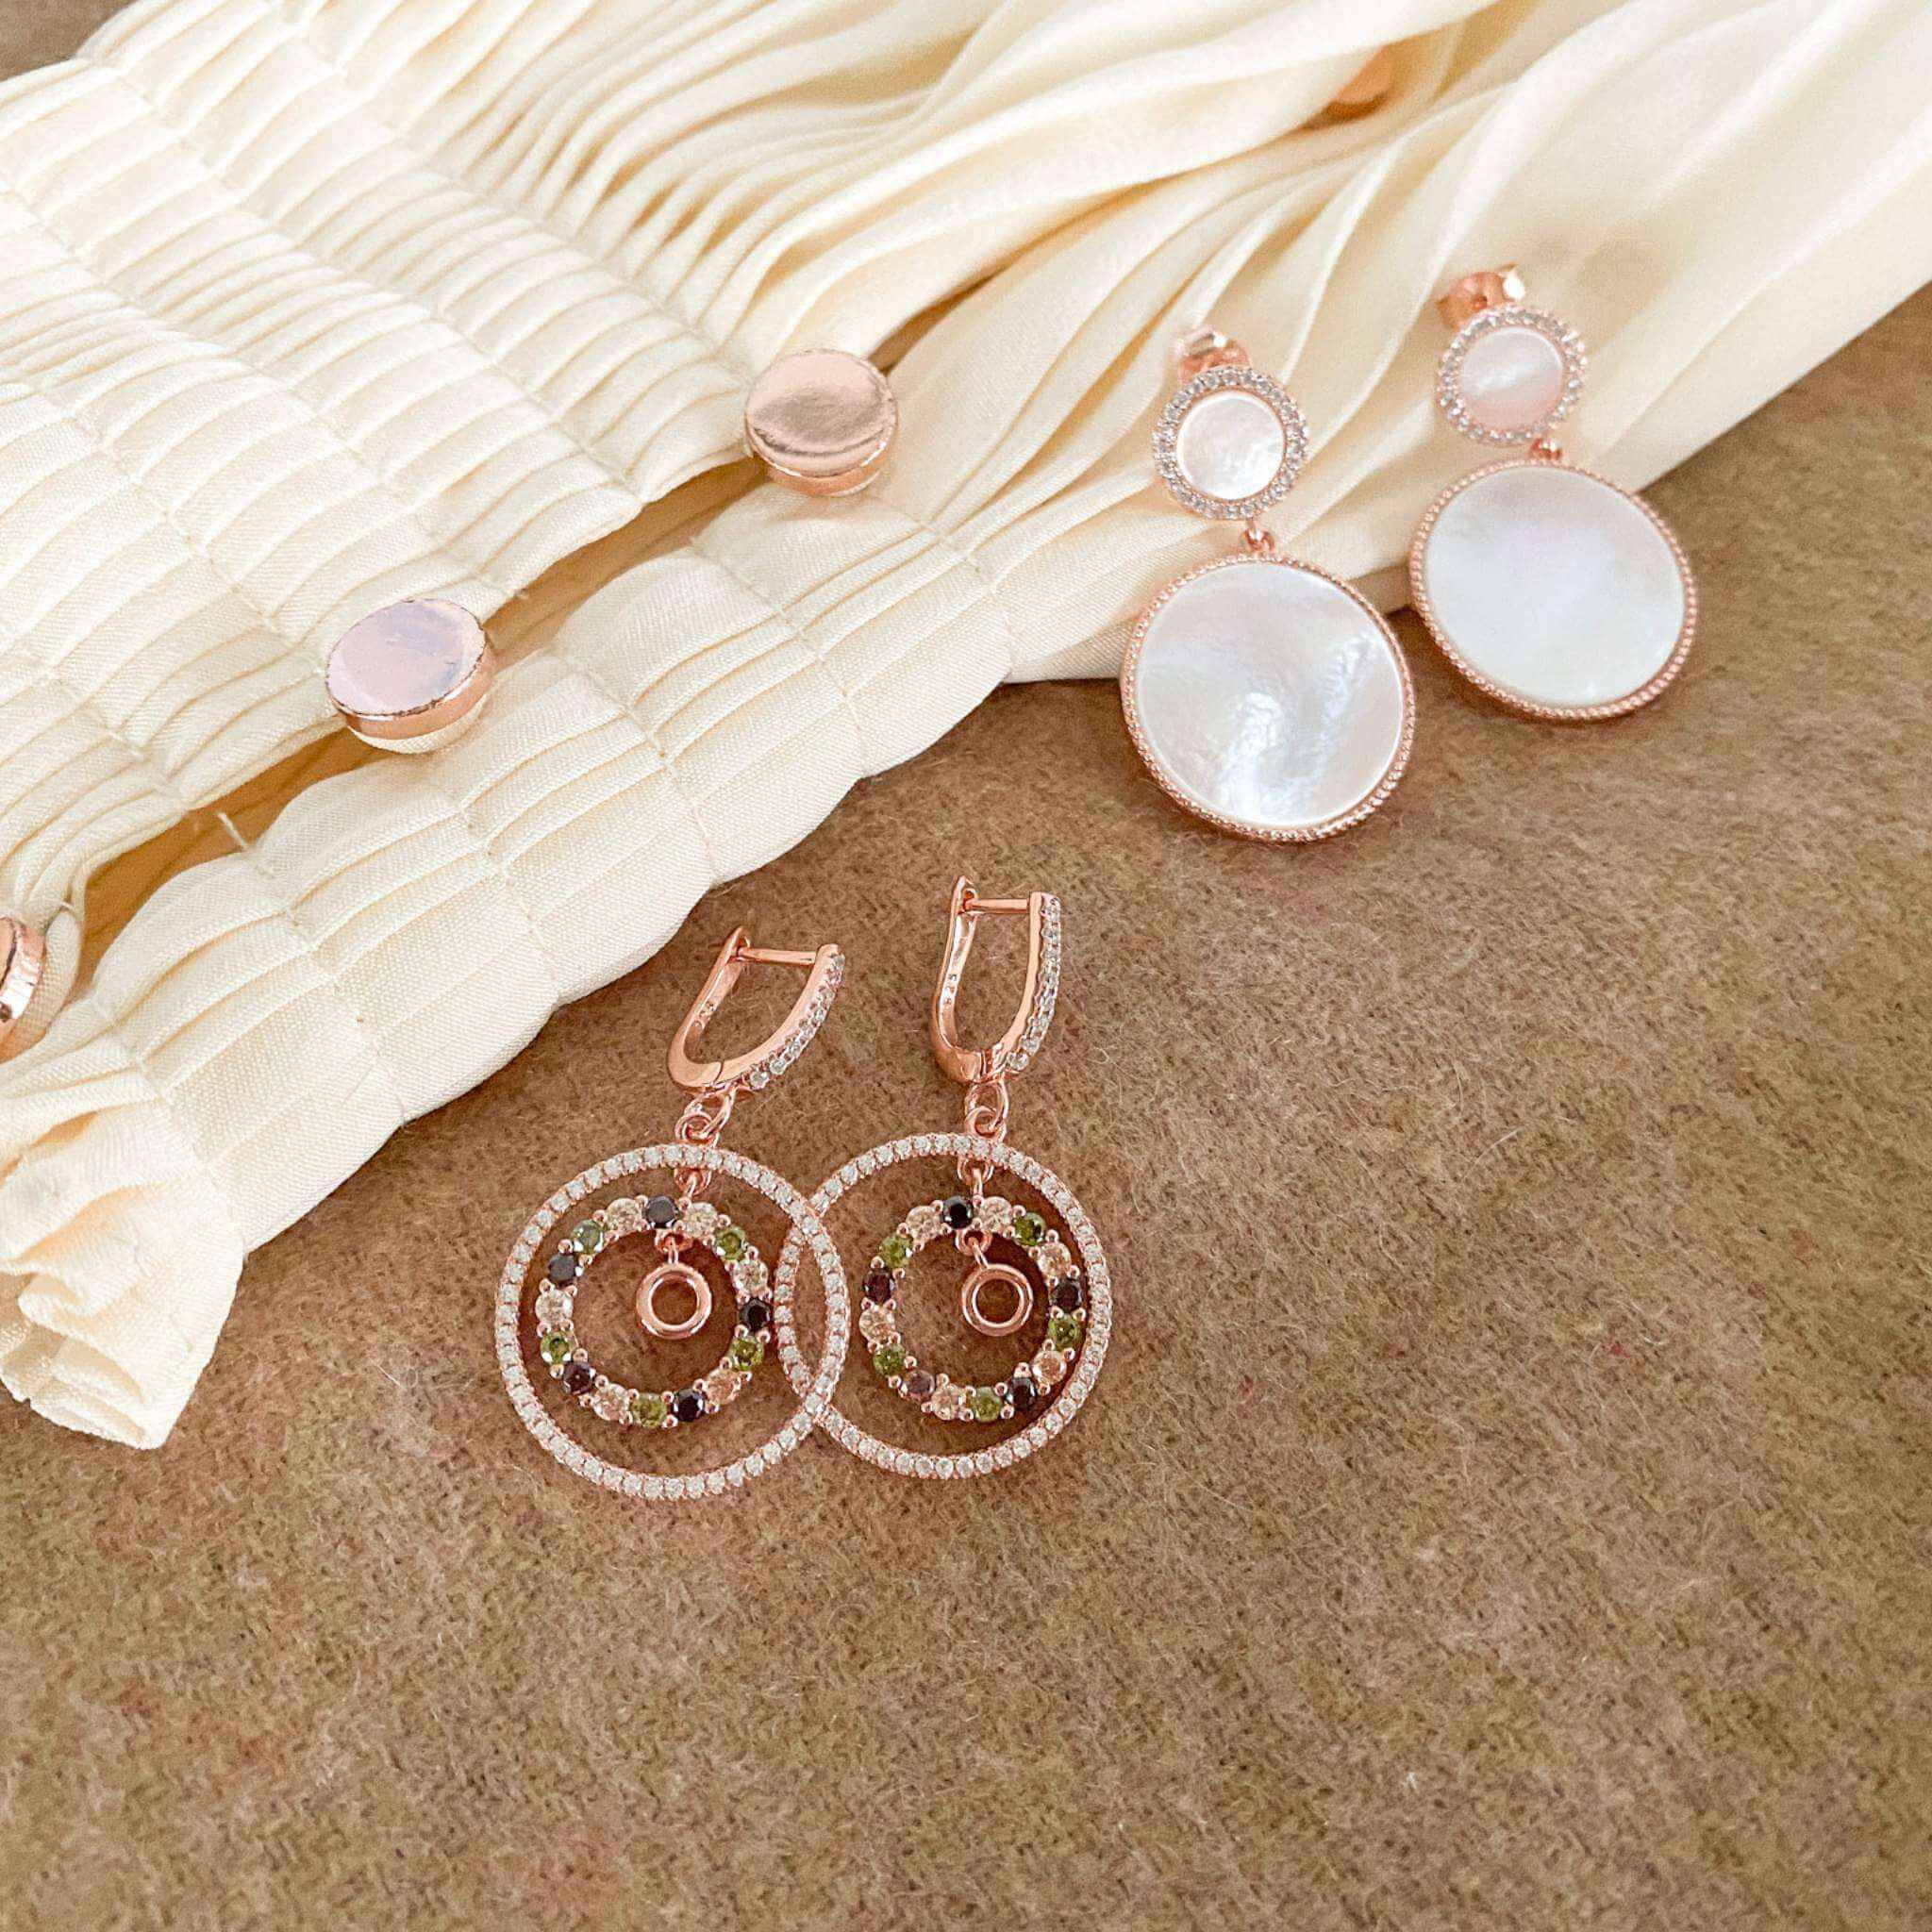 Styled perspective of mother of pearl teardrop earrings with a refined rose gold finish, showcasing exquisite craftsmanship.